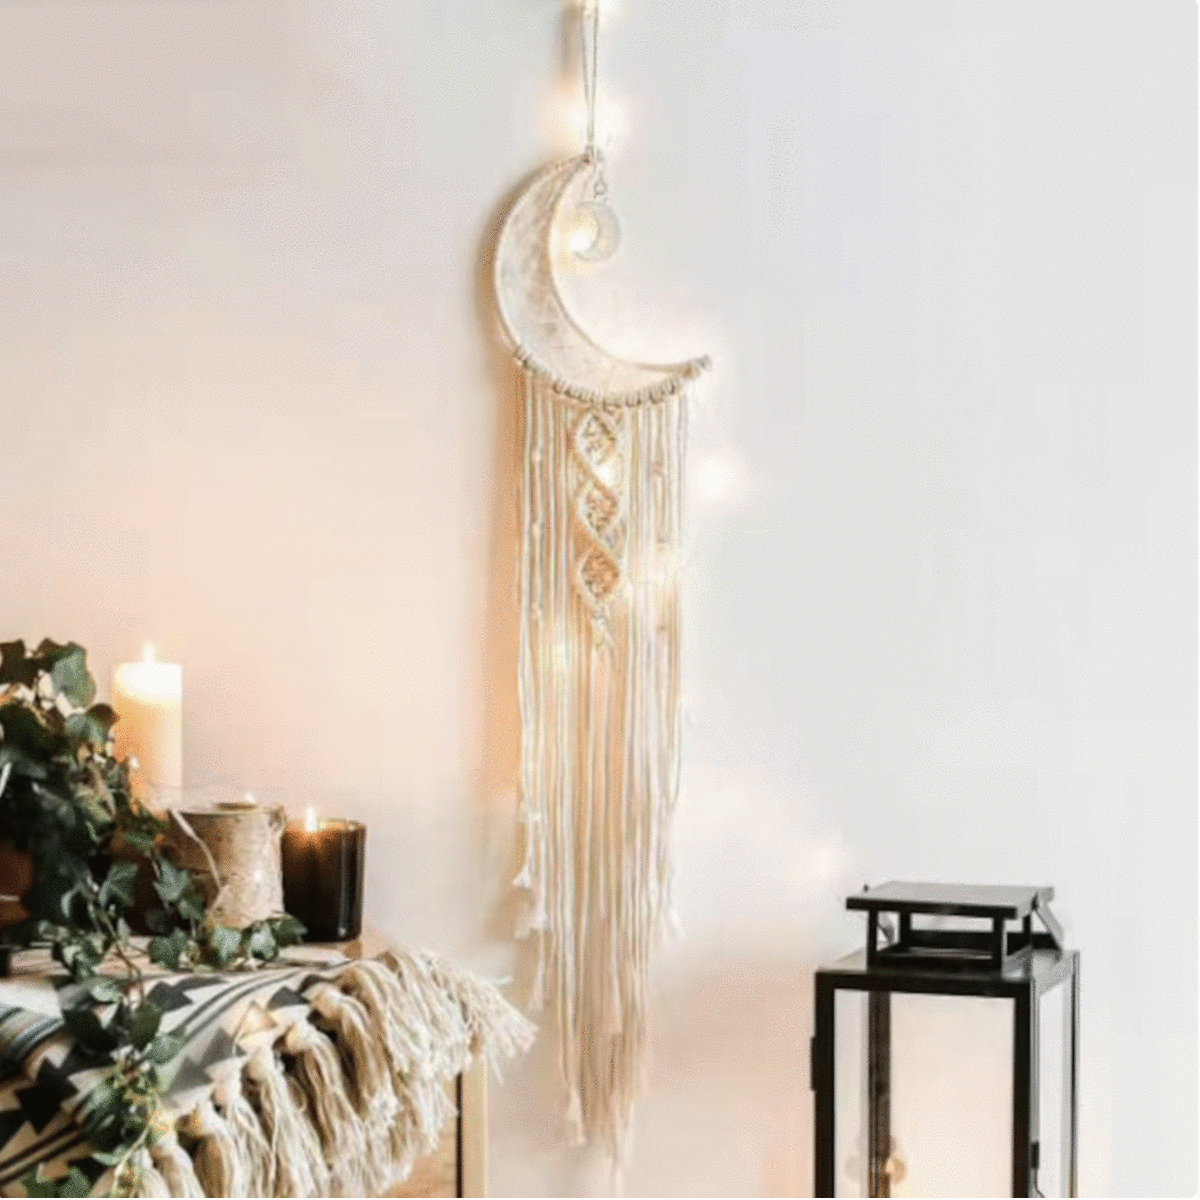 Home Decor Wall Hanging Moon Dream Catcher - Home Essentials Store Retail